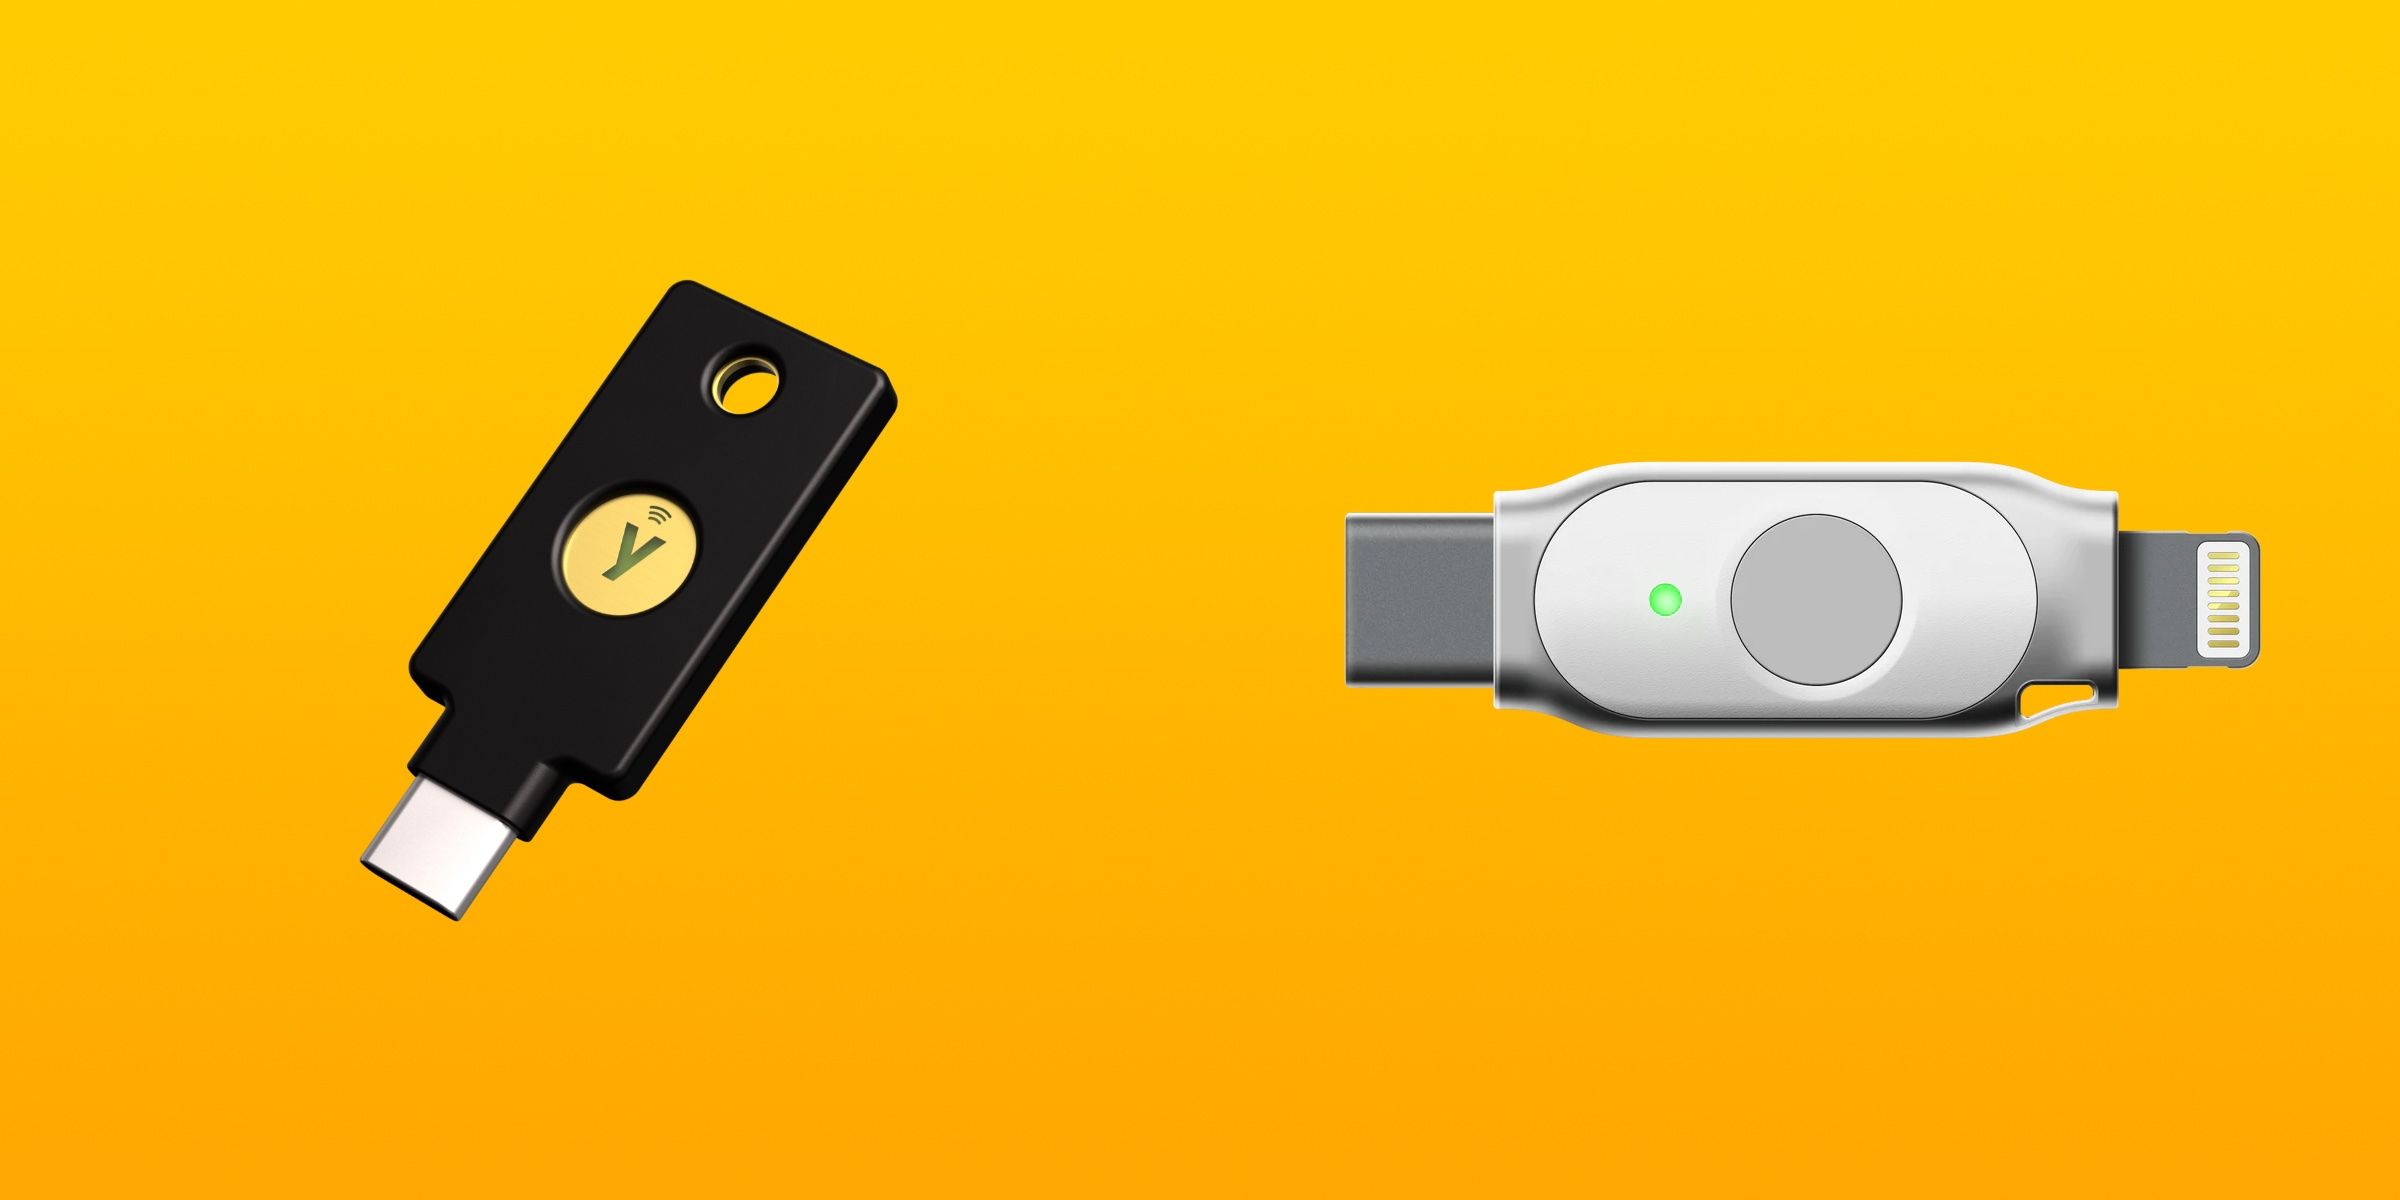 The Yubikey USB-C and FEITIAN iePass Security Keys against a yellow gradient background.